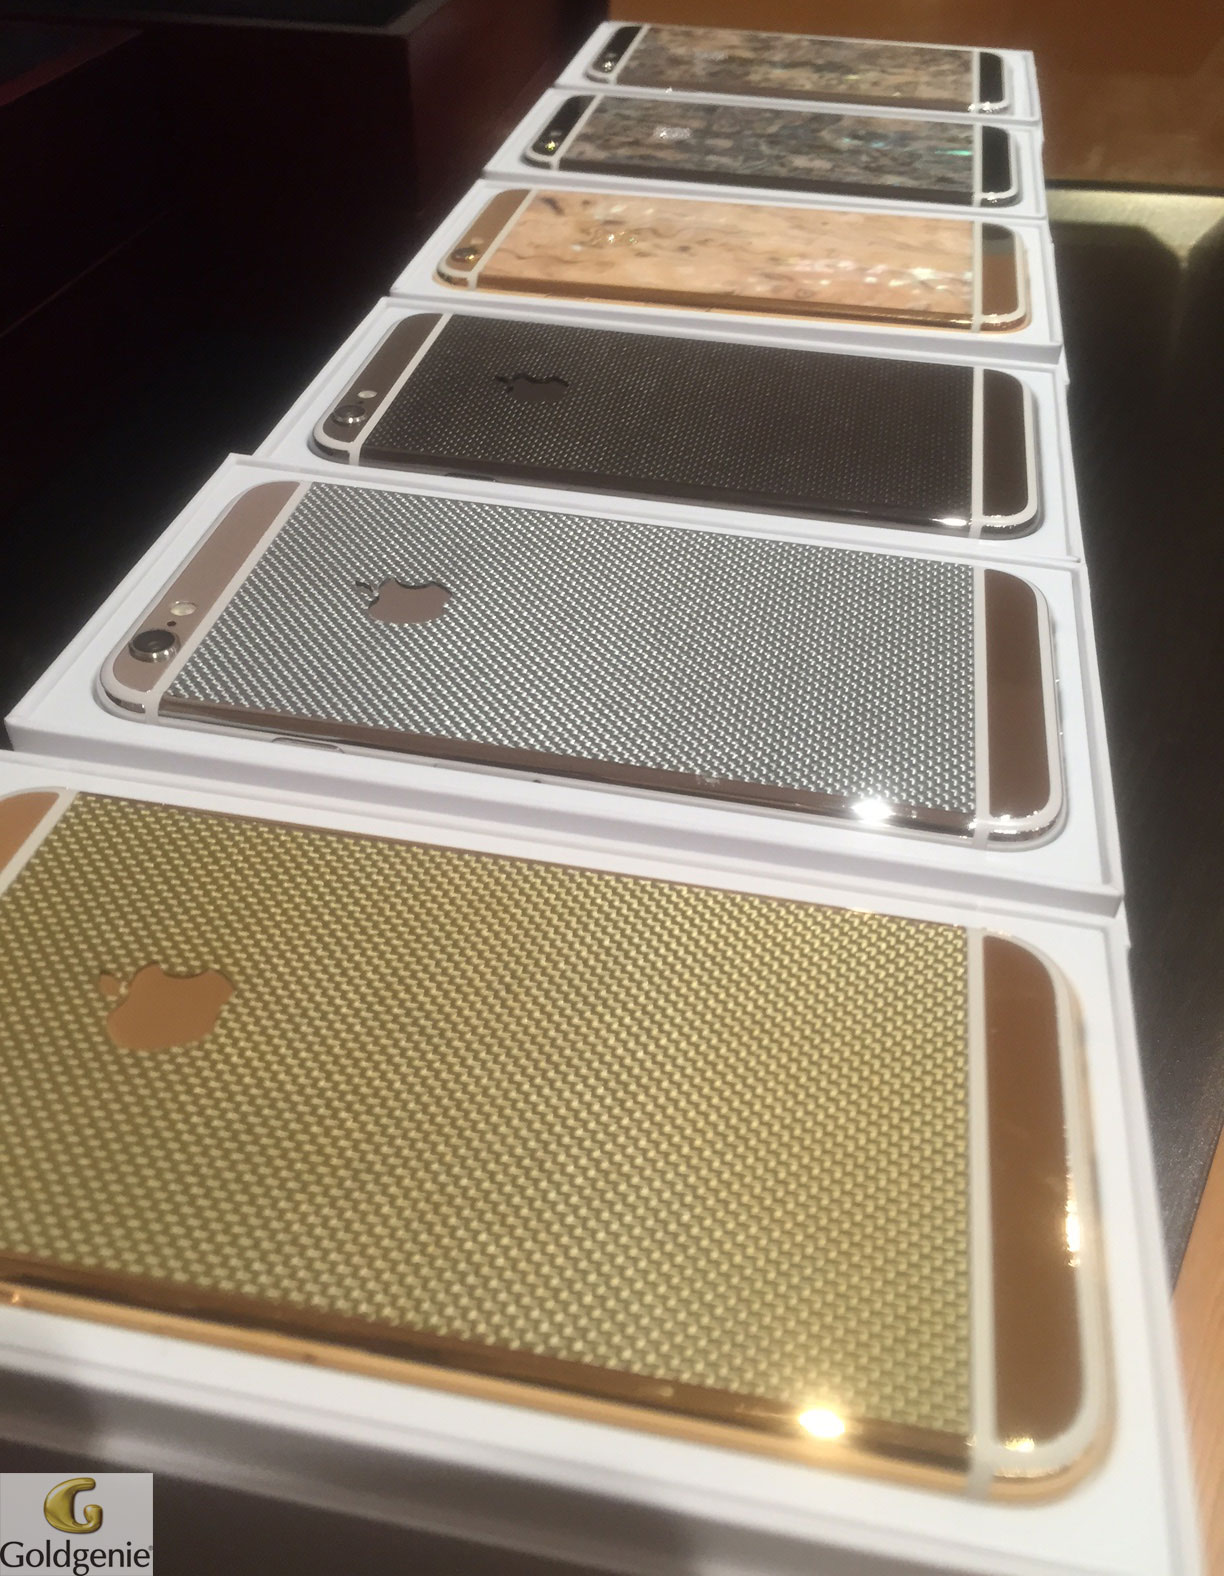 New Luxury Customised iPhone 6 Collection, April 2015